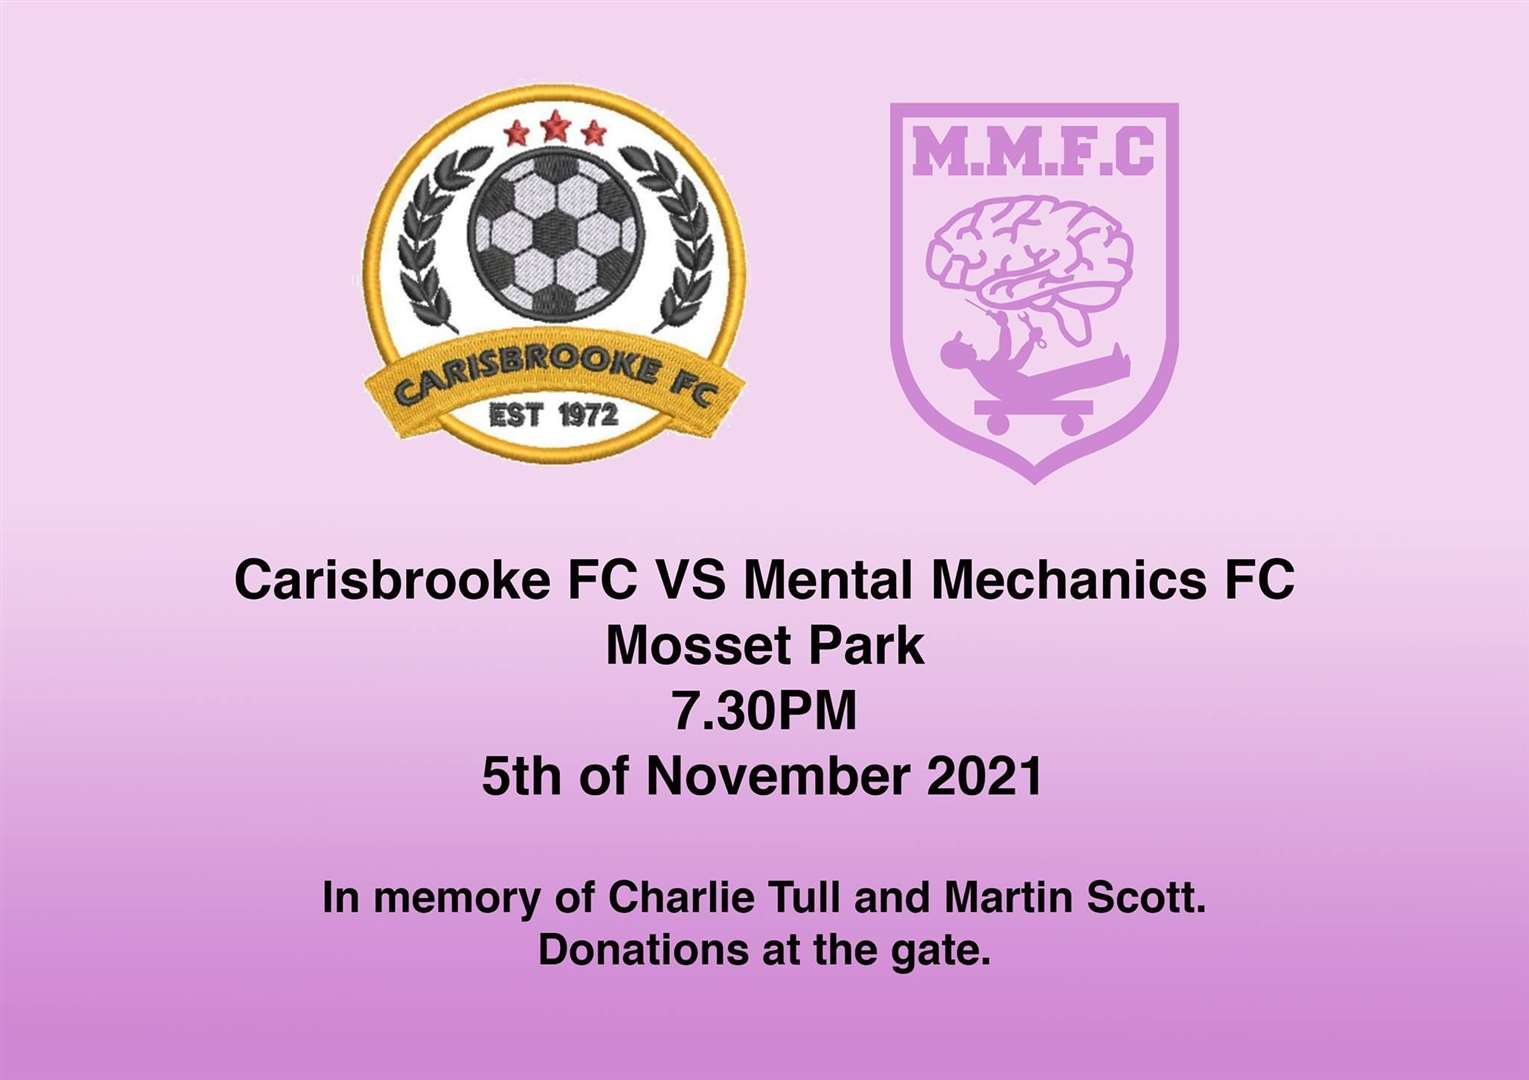 The match is due to take place under the lights at Mosset Park.